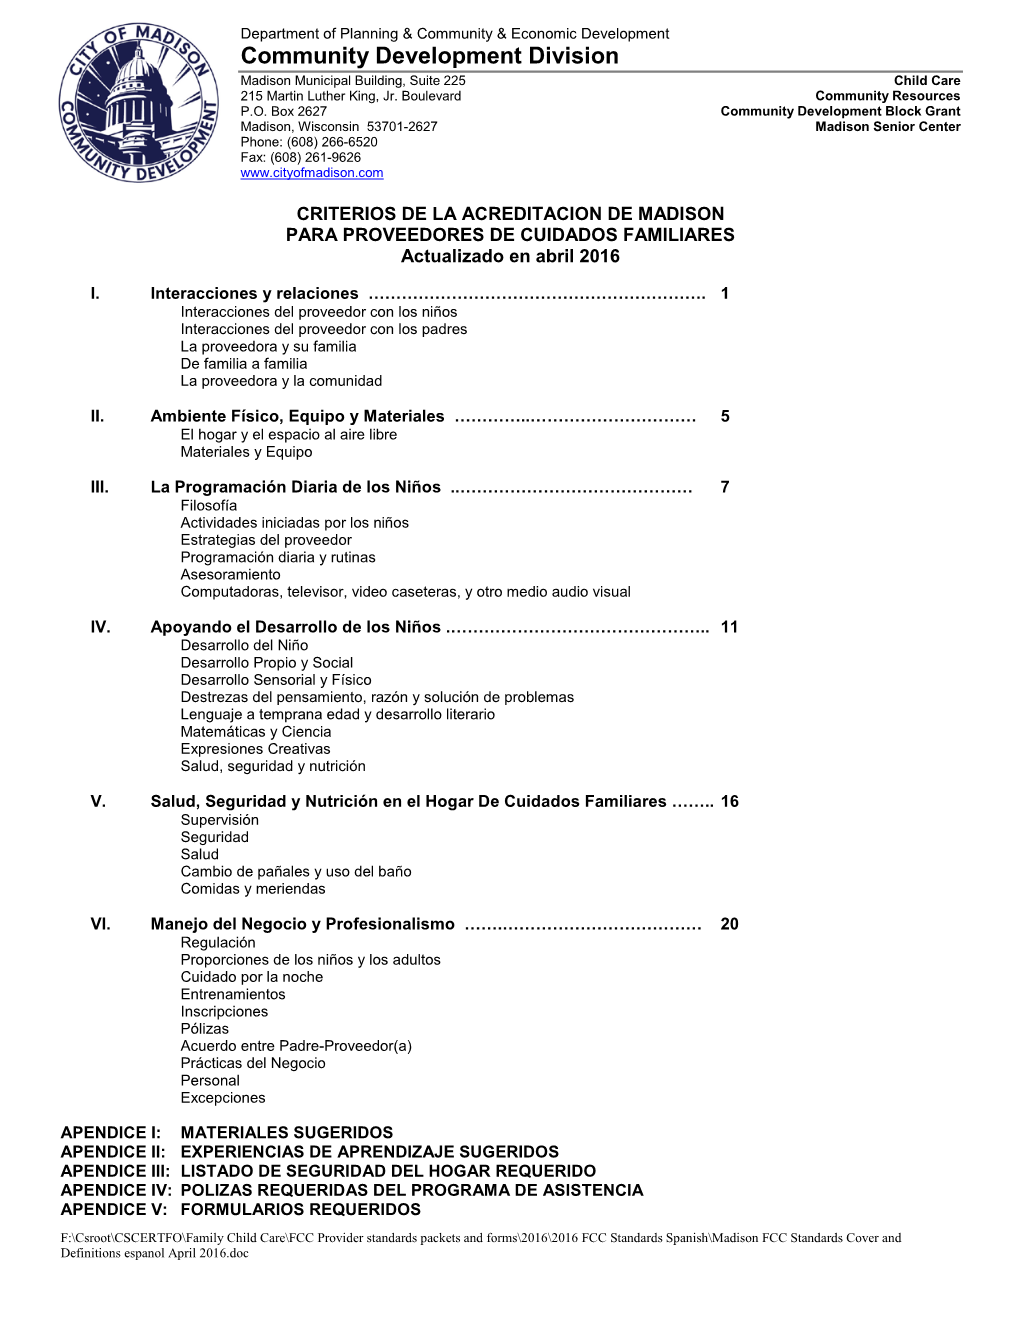 Spanish\Madison FCC Standards Cover and Definitions Espanol April 2016.Doc